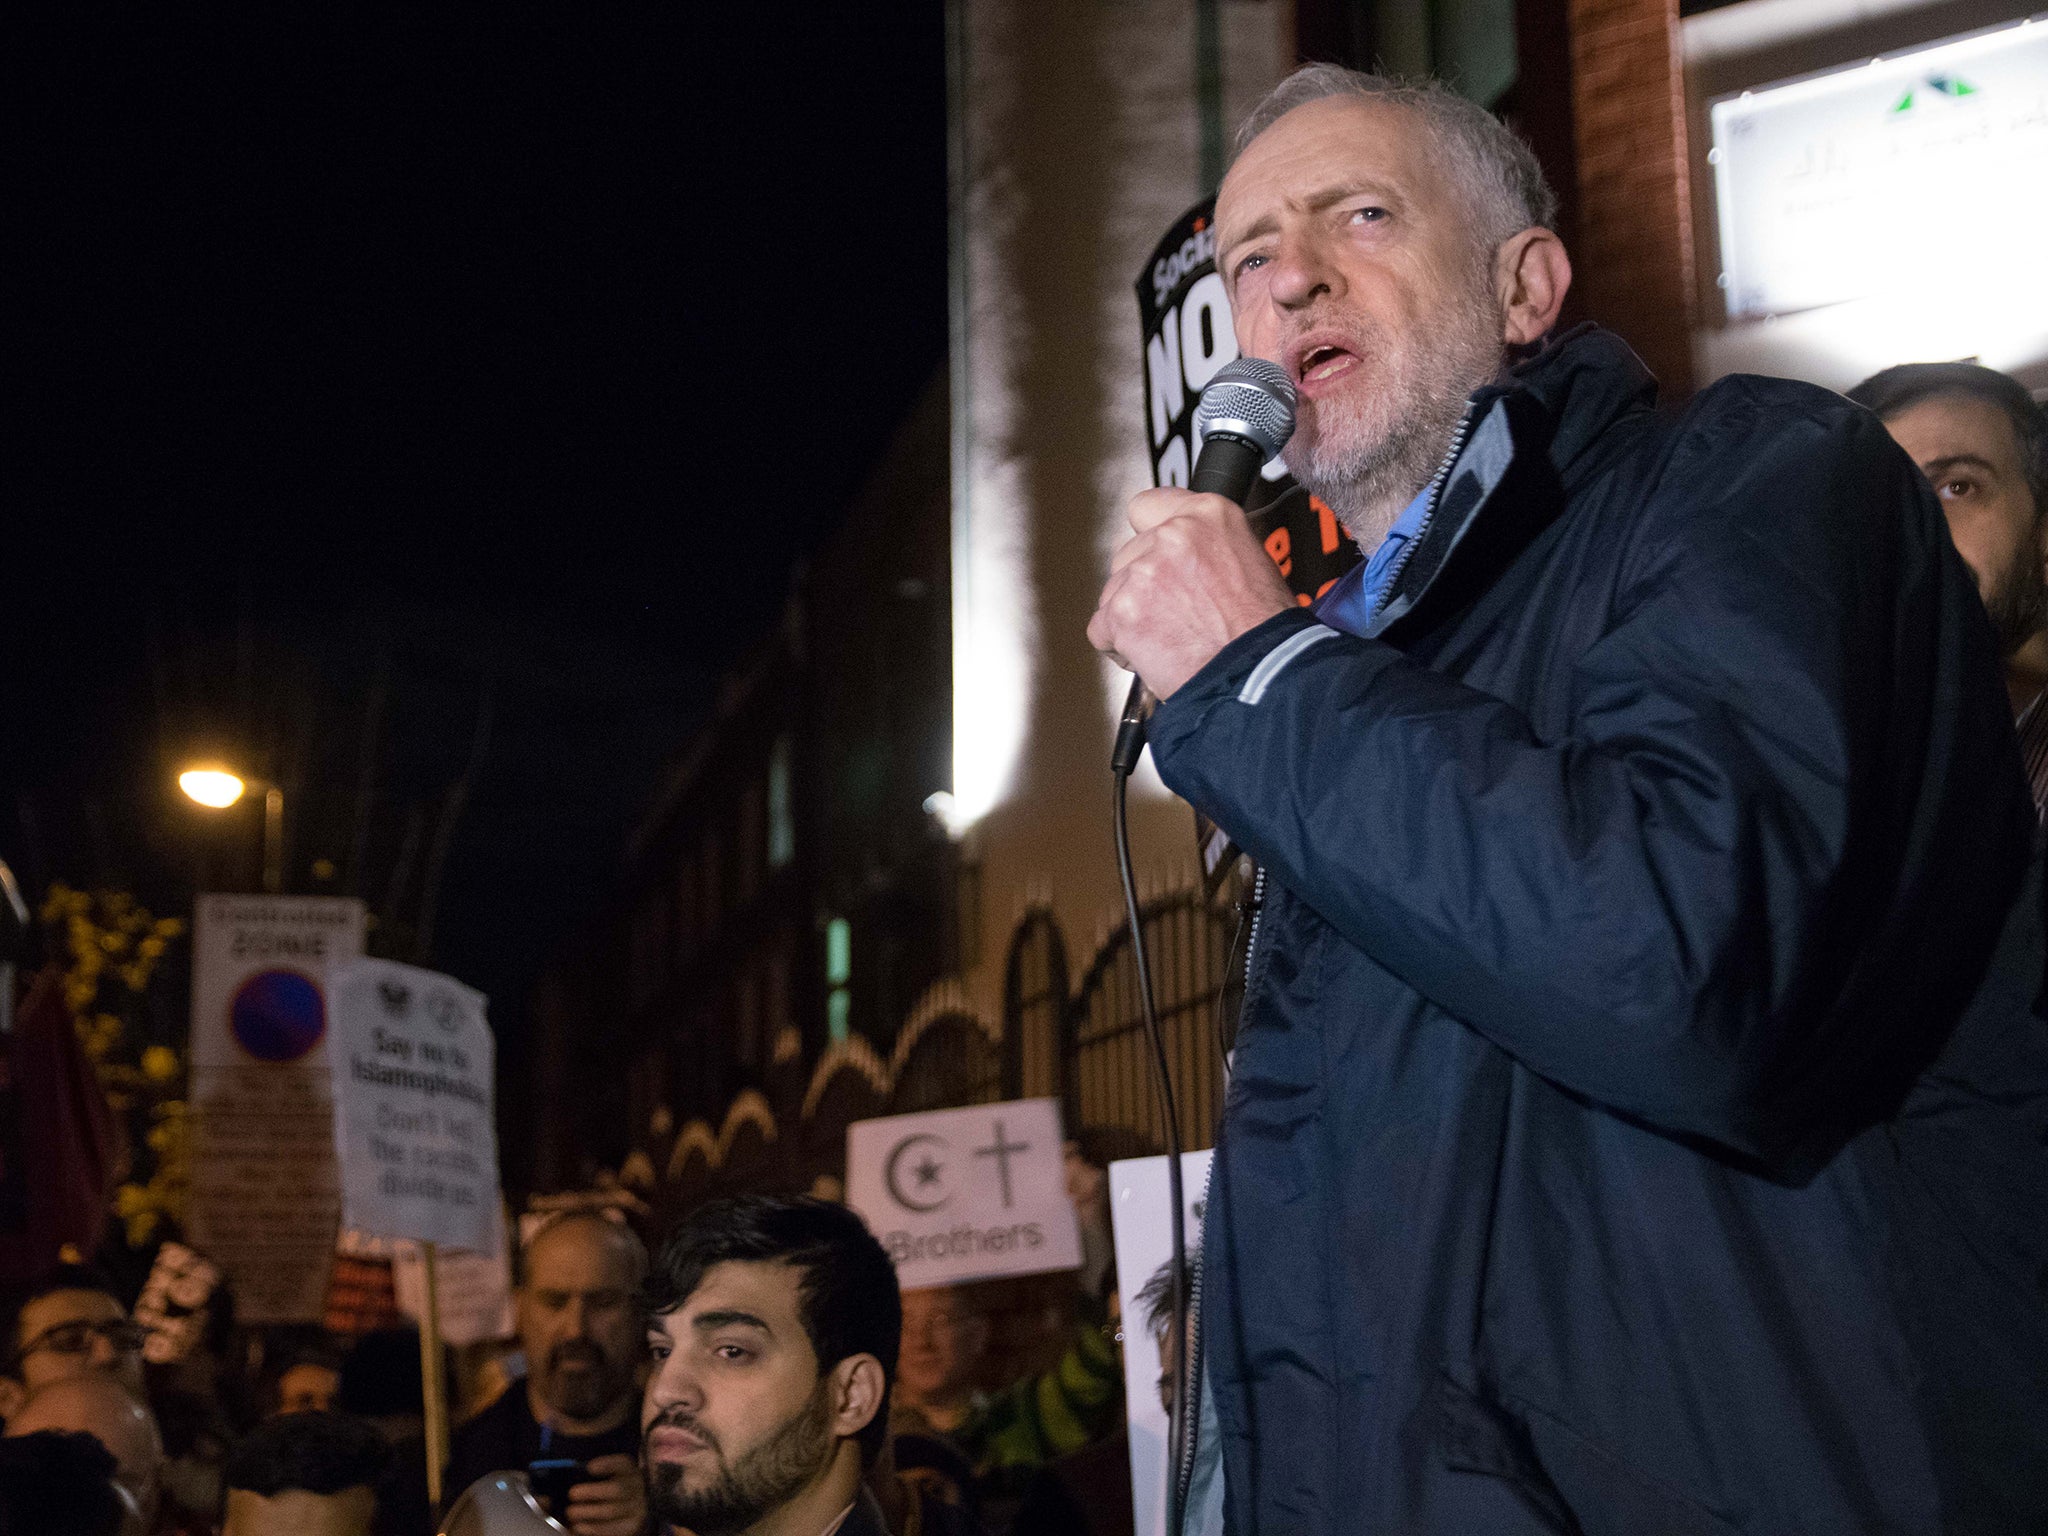 Supporters of Jeremy Corbyn have called for an end to infighting and for a co-ordinated attack on the Tories